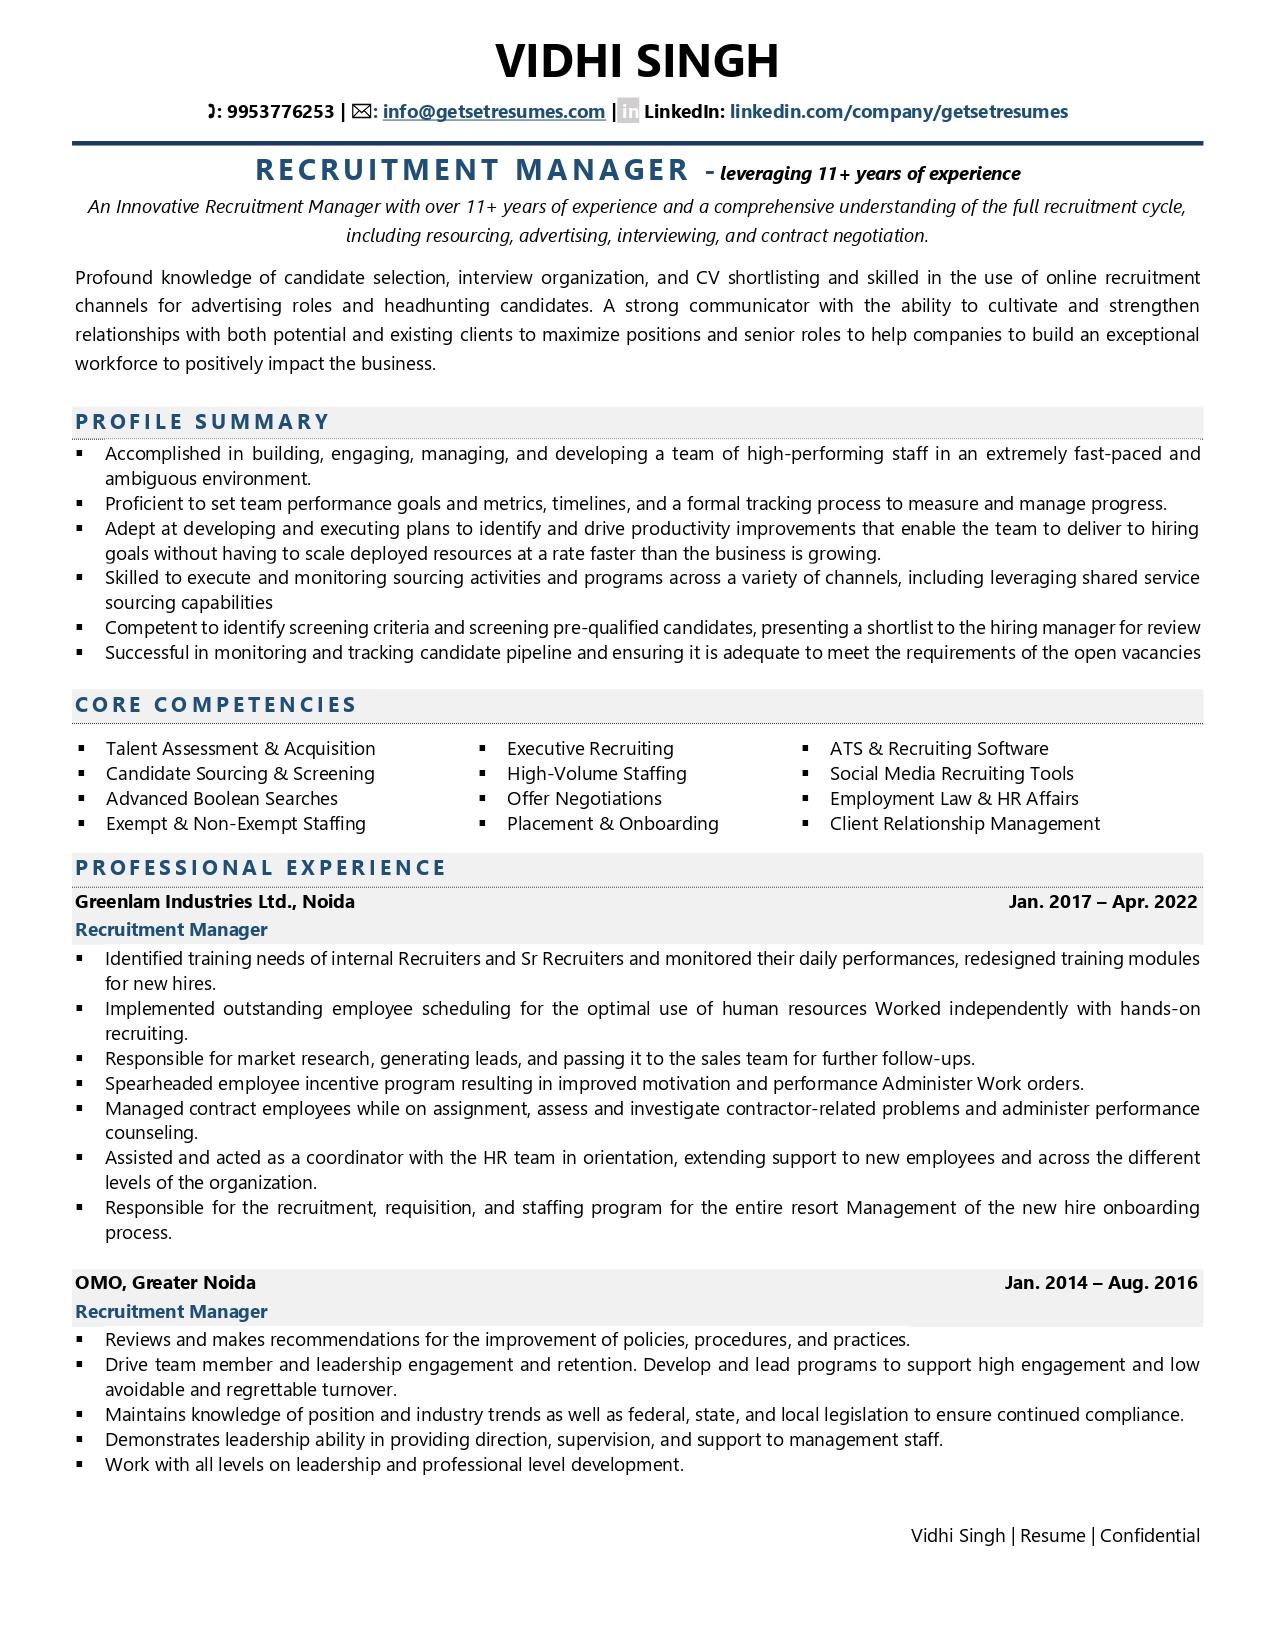 Recruitment Manager - Resume Example & Template